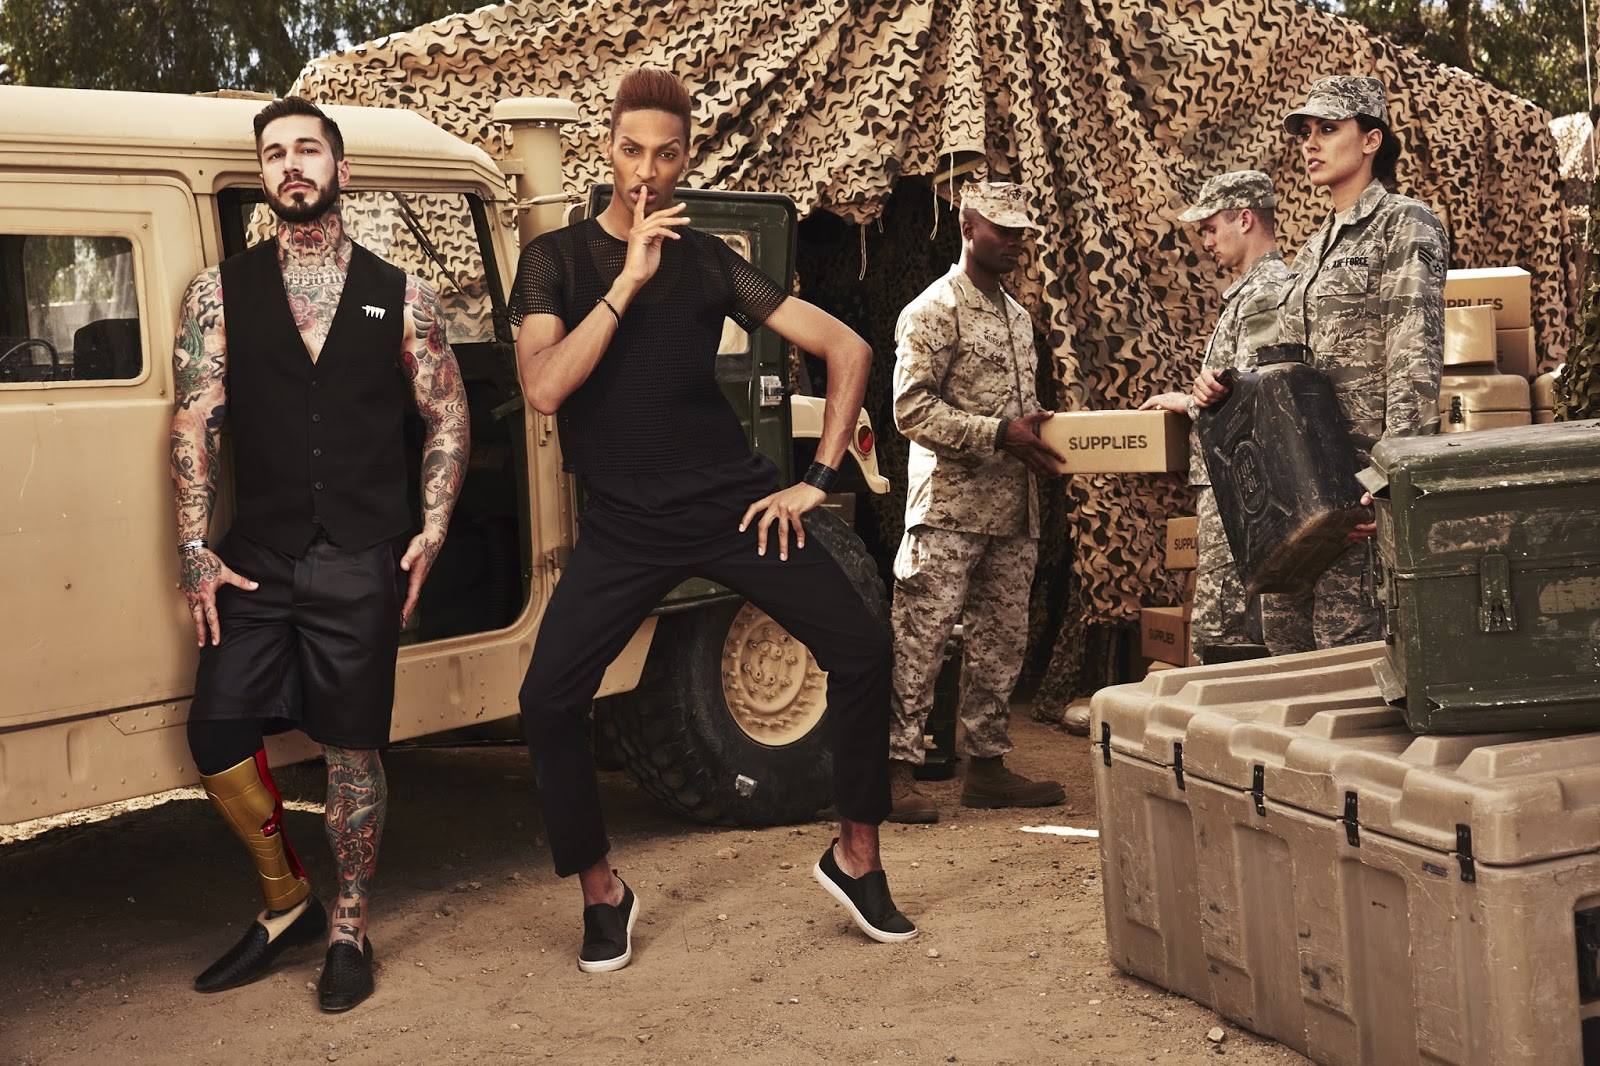 ANTM Cycle 22 4th Episode : Extreme Posing with War Veterans & Makeover...